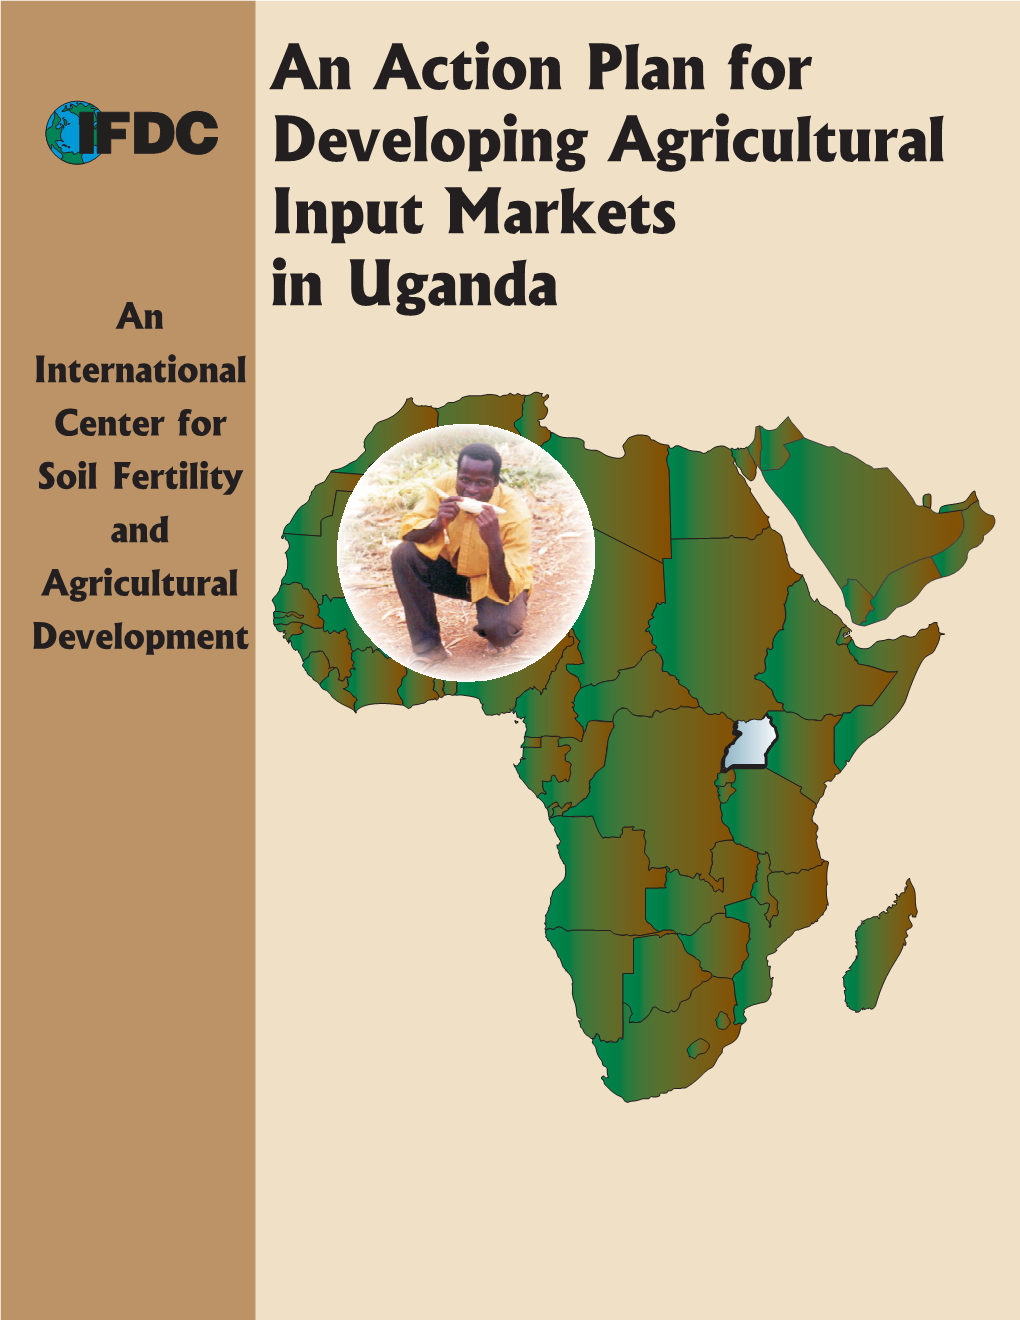 An Action Plan for Developing Agricultural Input Markets in Uganda